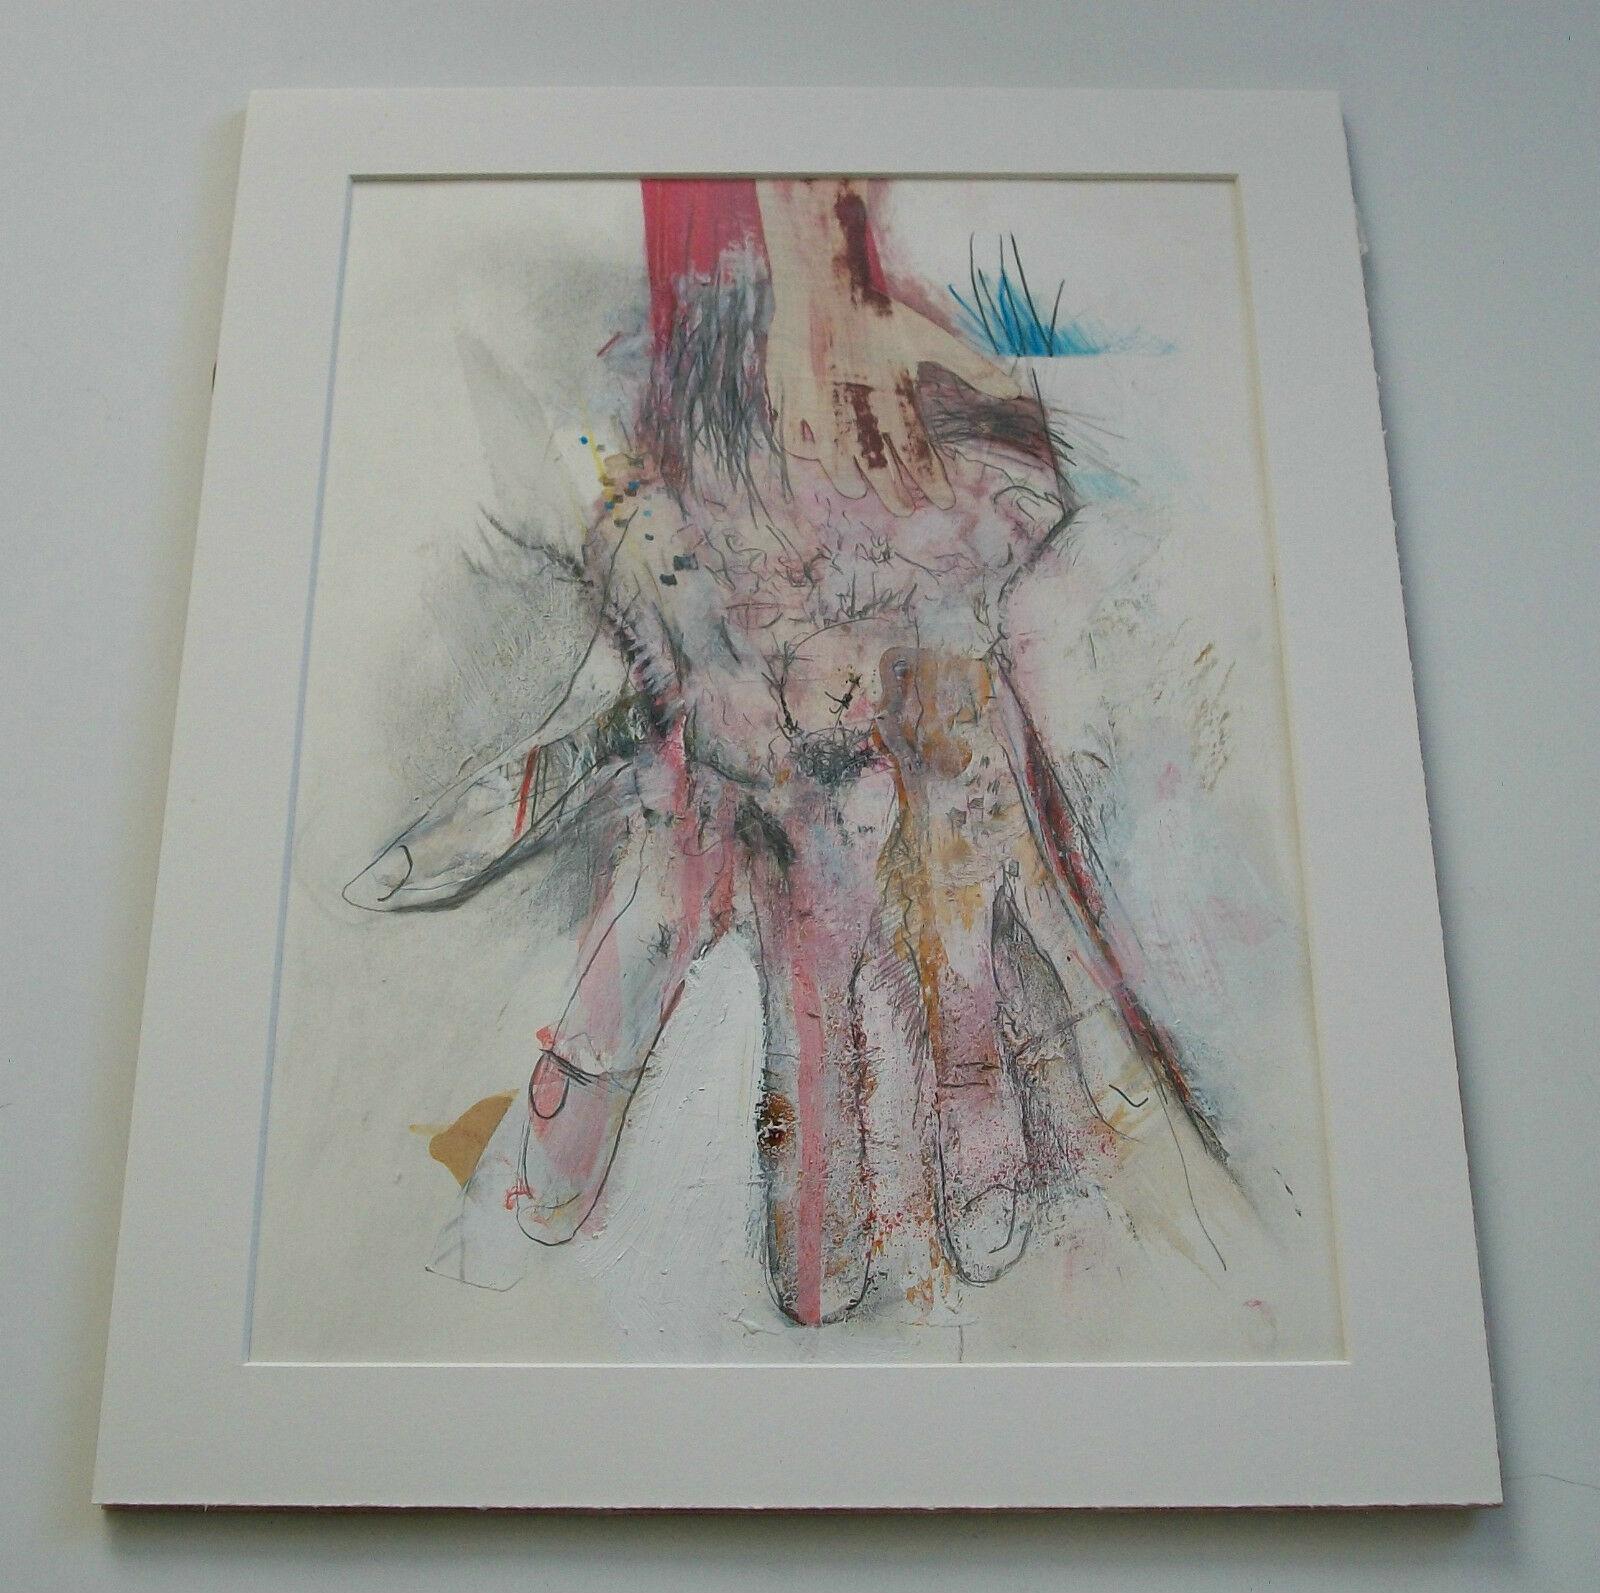 Hand-Painted Contemporary Mixed Media Collage on Paper, Initialed, Unframed, 21st Century For Sale